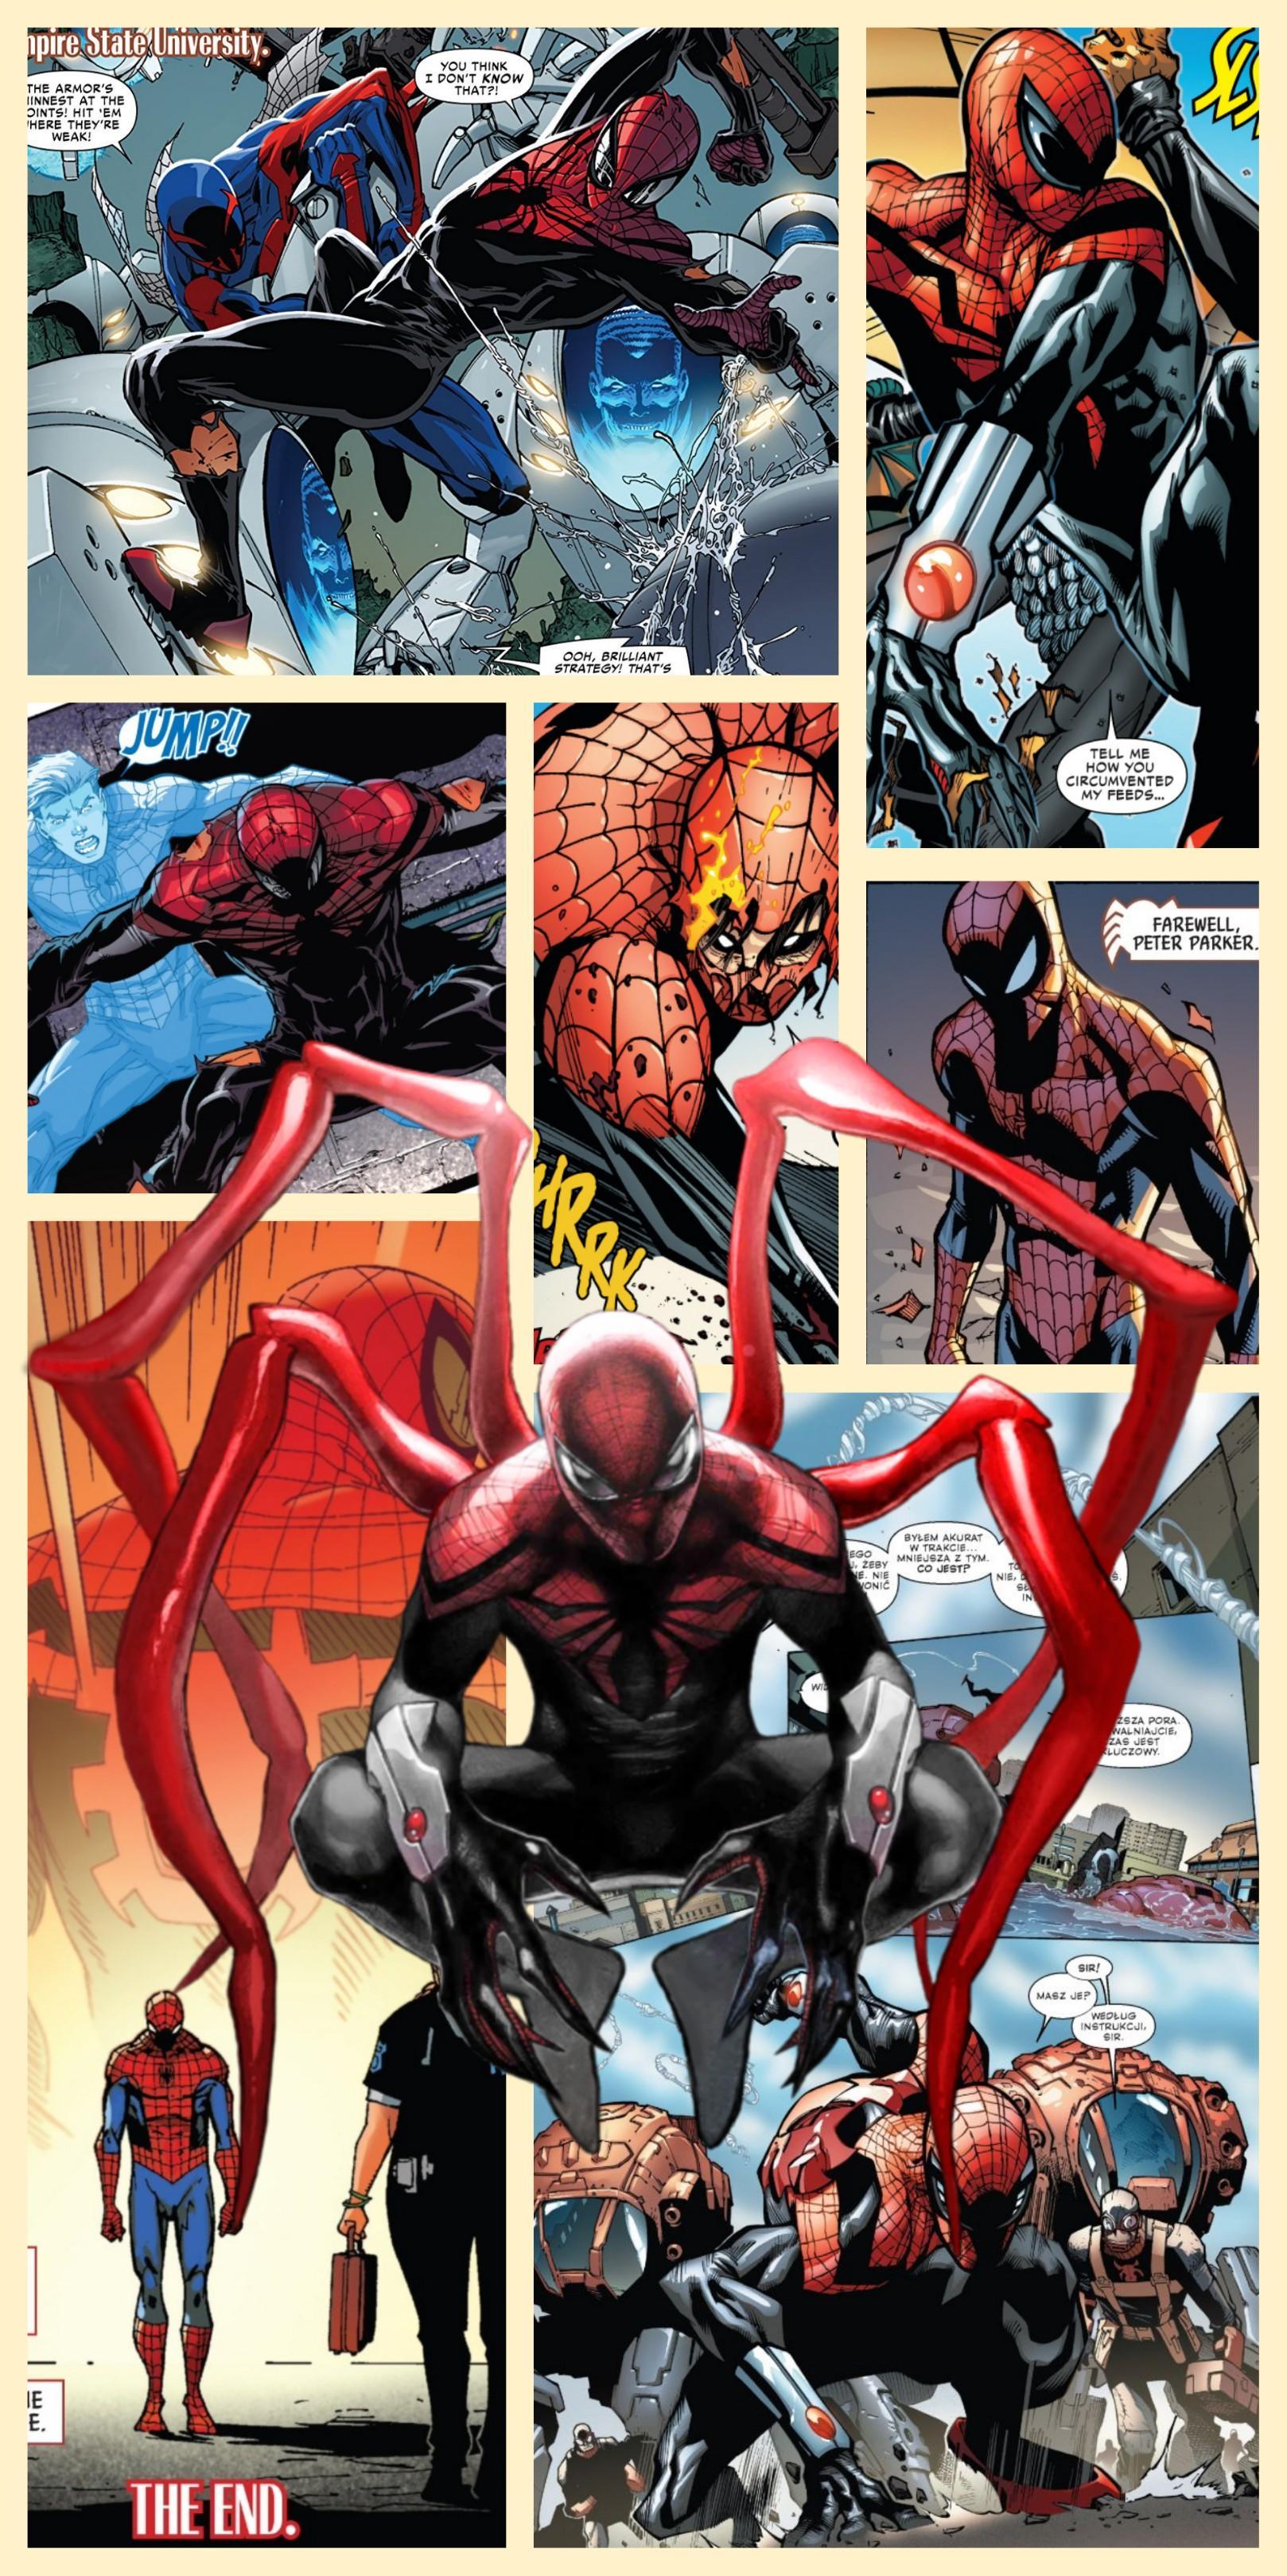 A Superior Spider Man Wallpaper That I Make For My Phone. Thought I